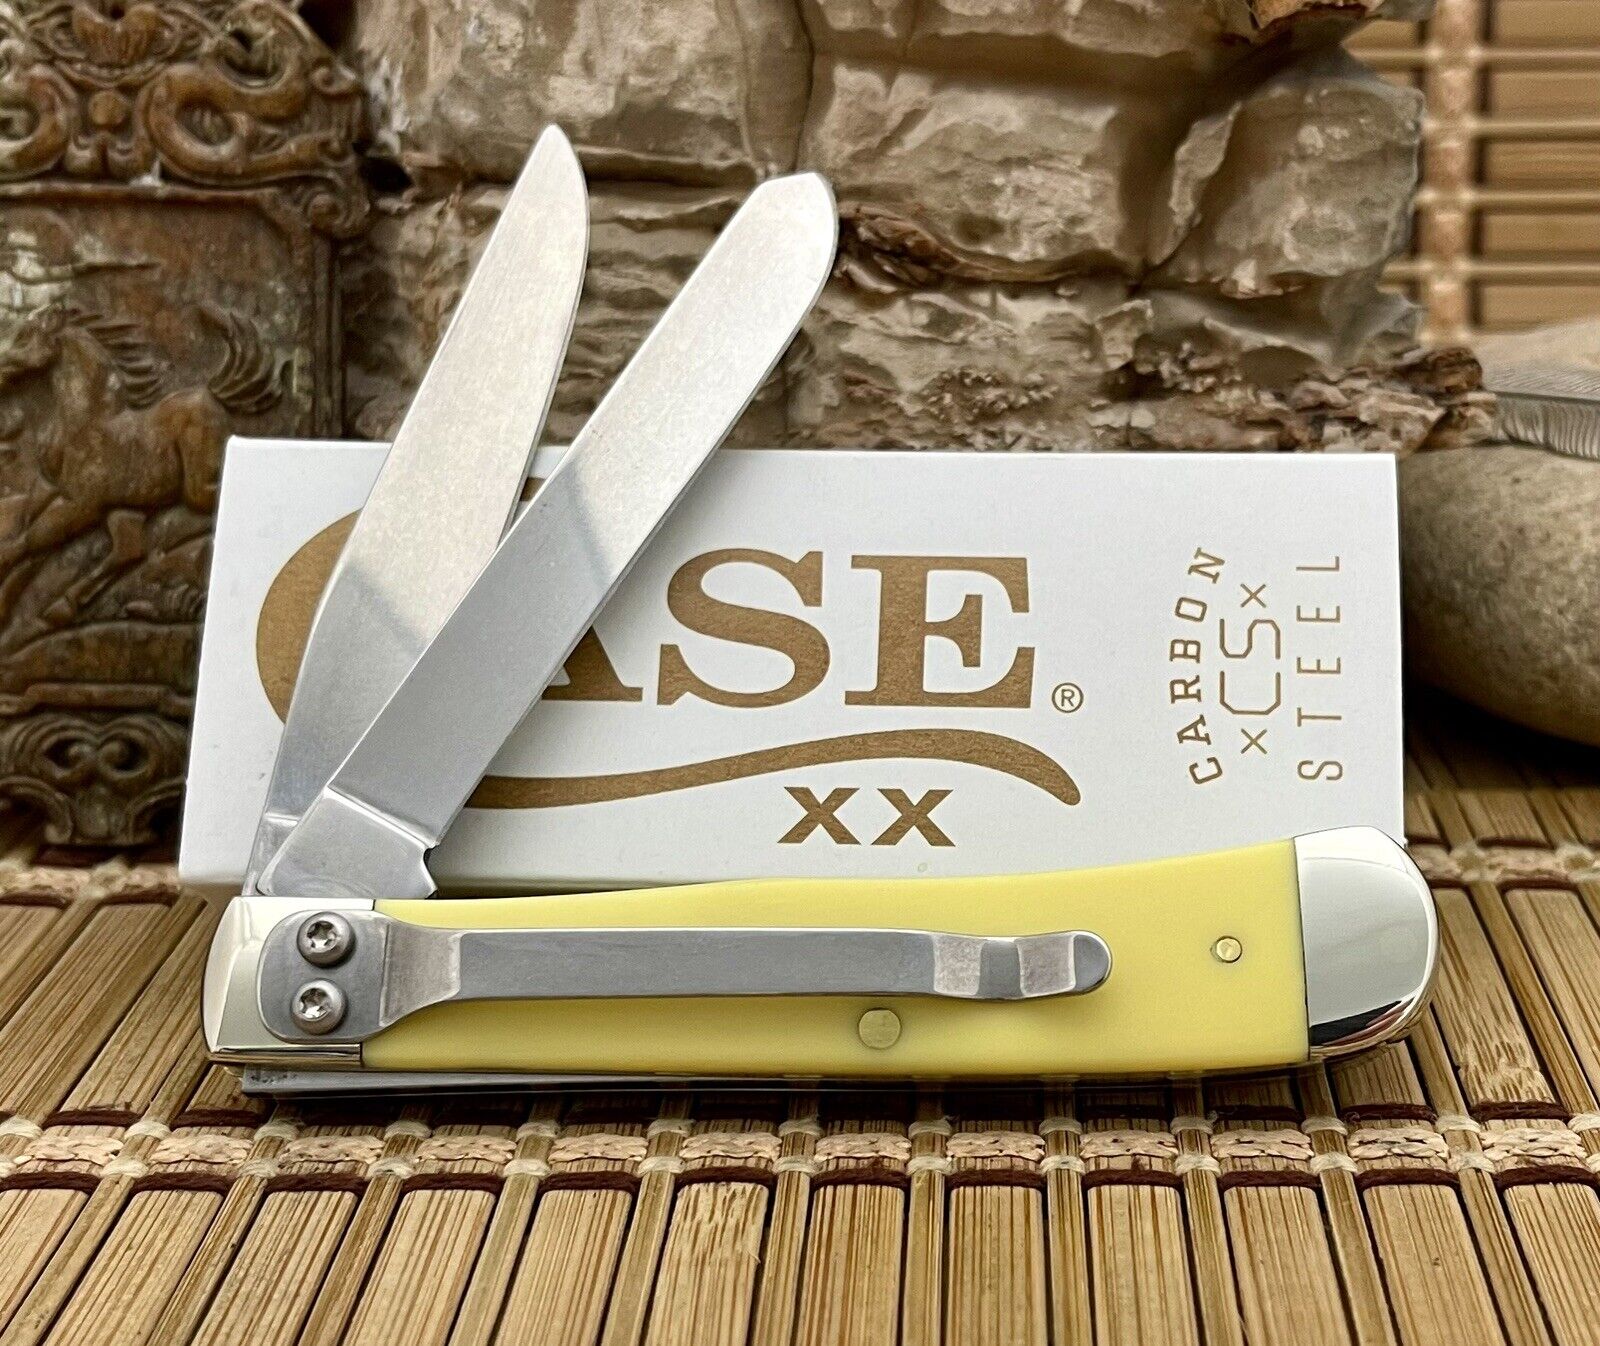 Case XX USA 2024 Smooth YELLOW Synthetic 30114 Carbon Trapper Knife w/Clip